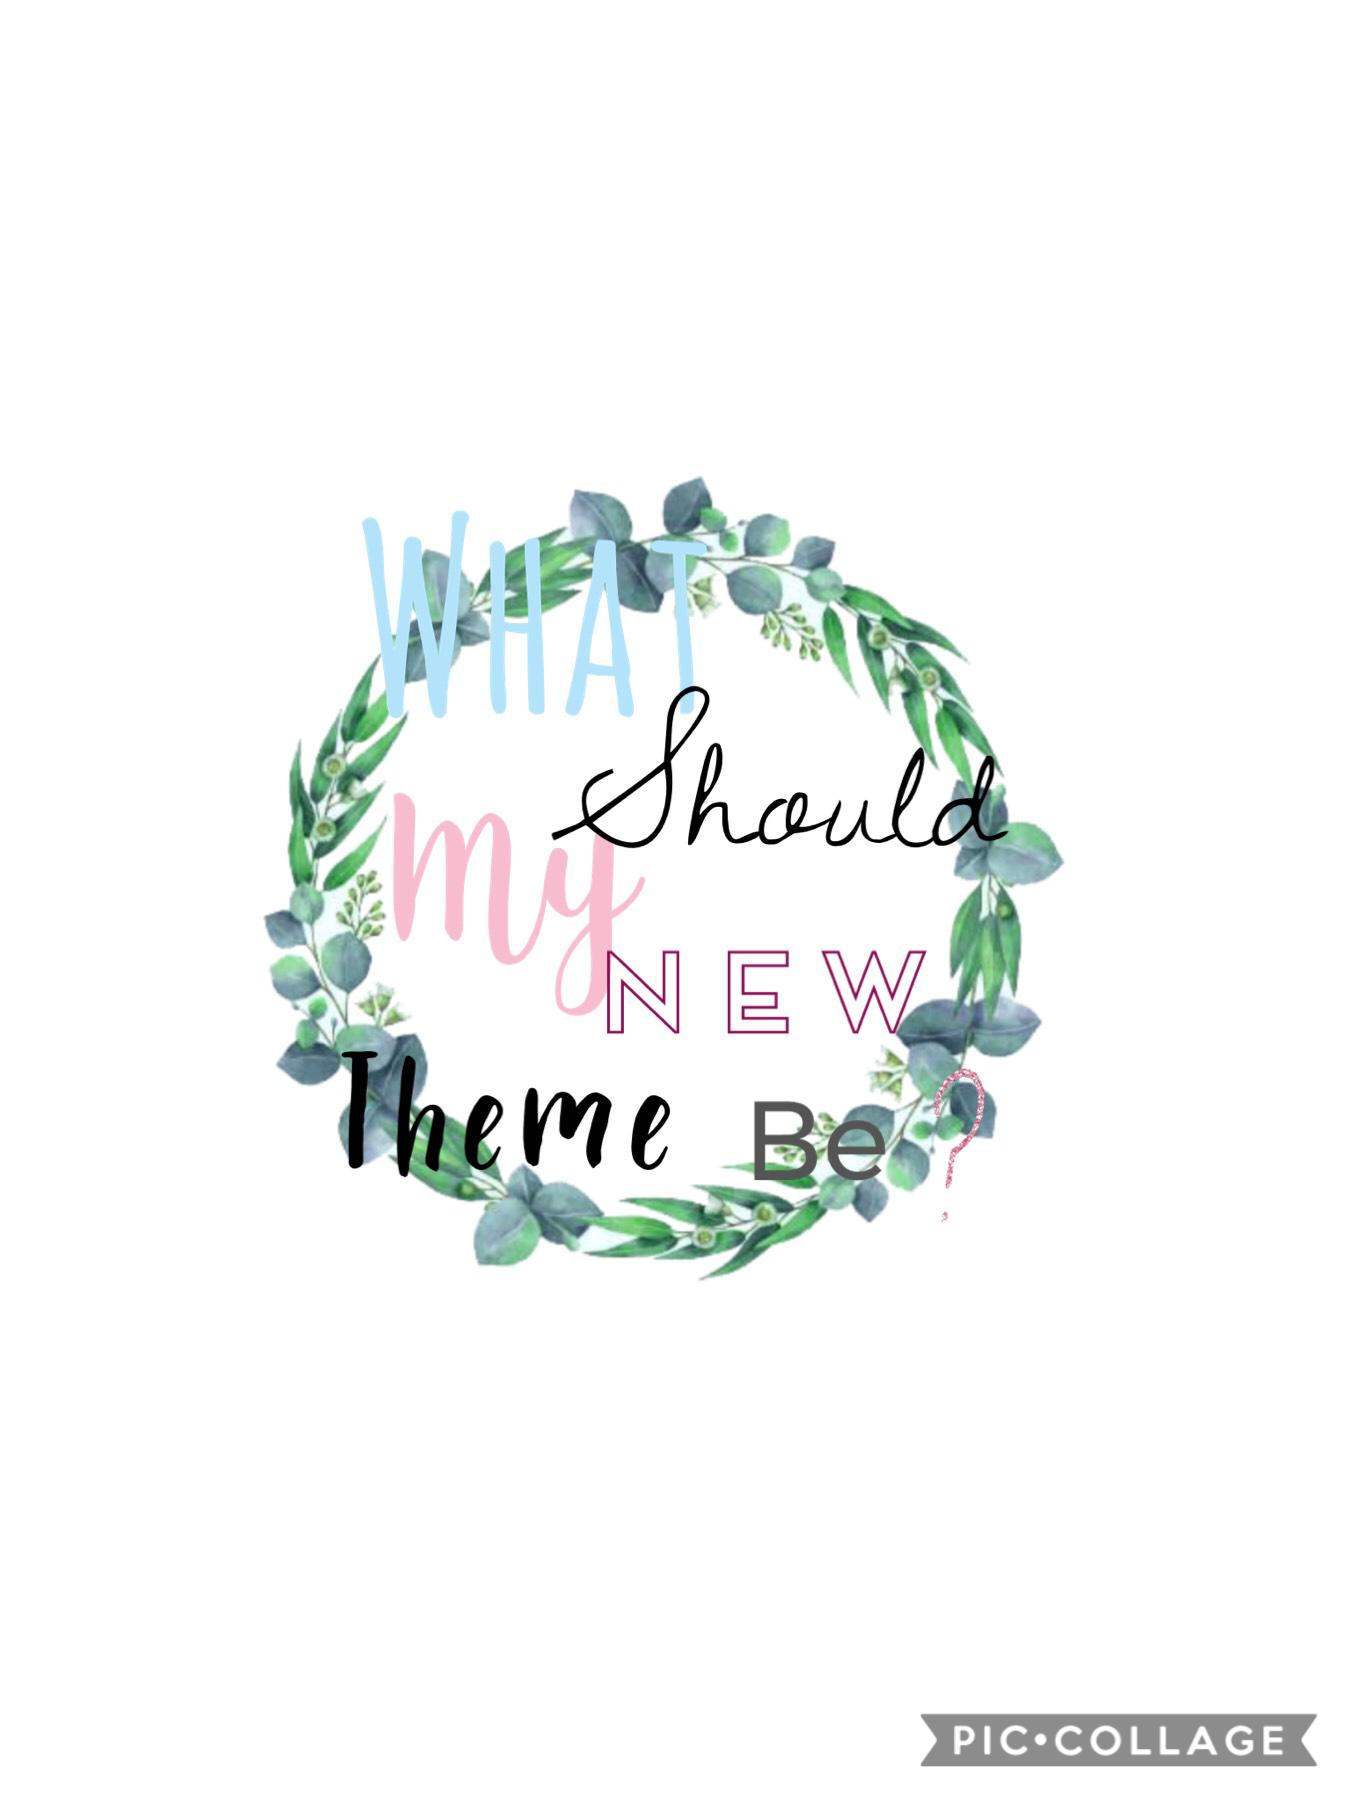 I’m back! Comment some ideas on what my new theme should be 🌸